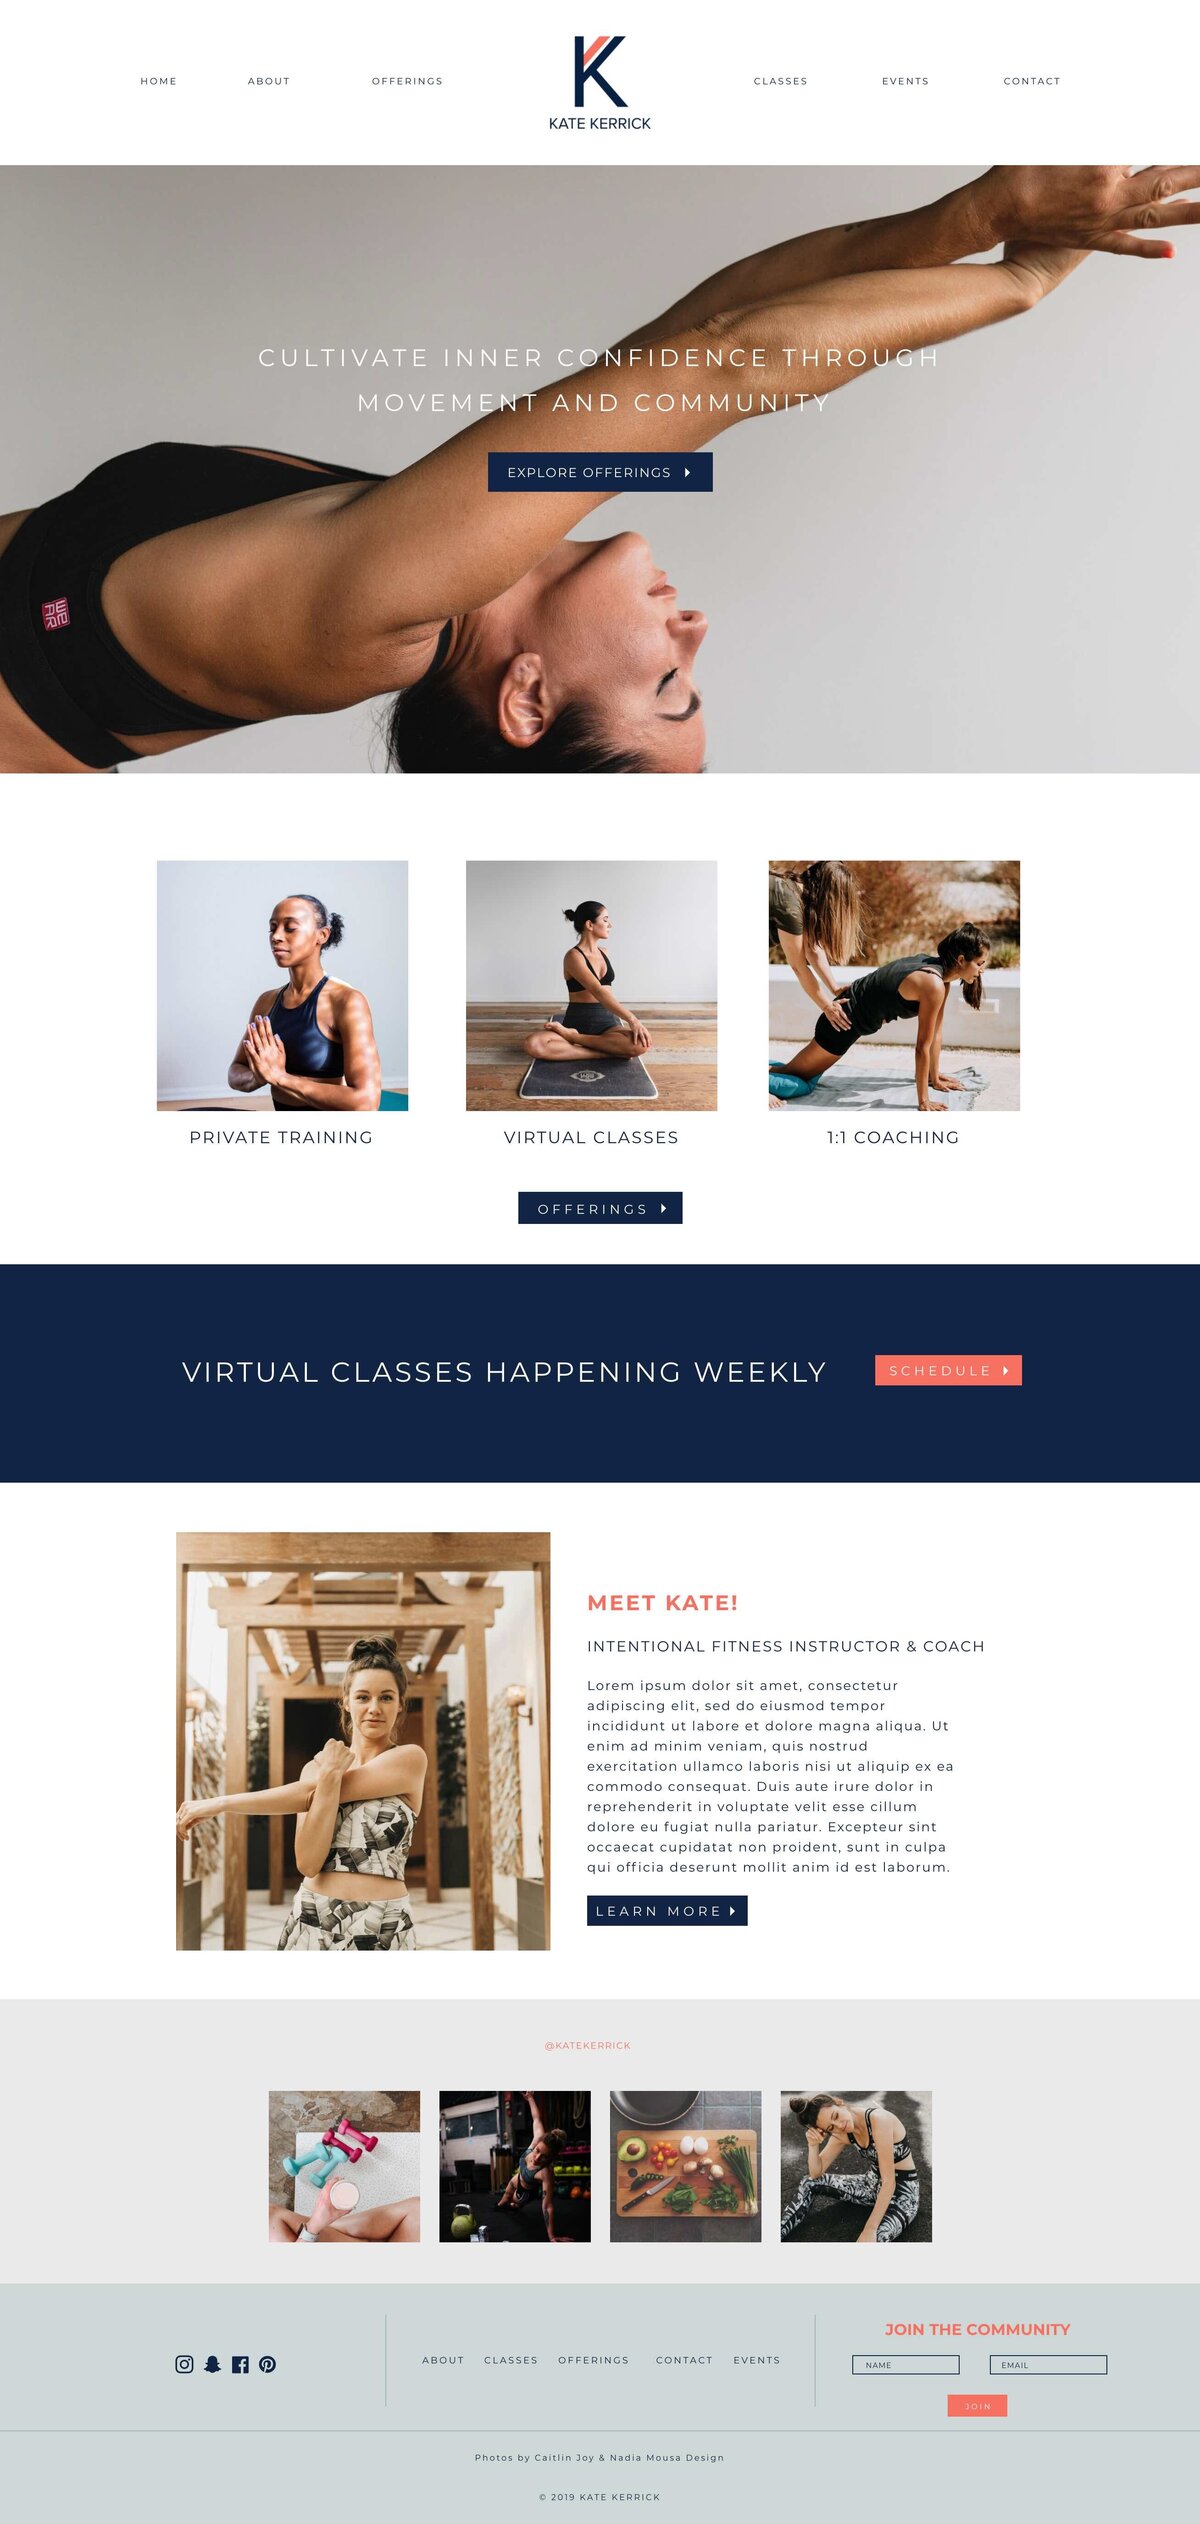 Website design  for fitness and wellness coach for women